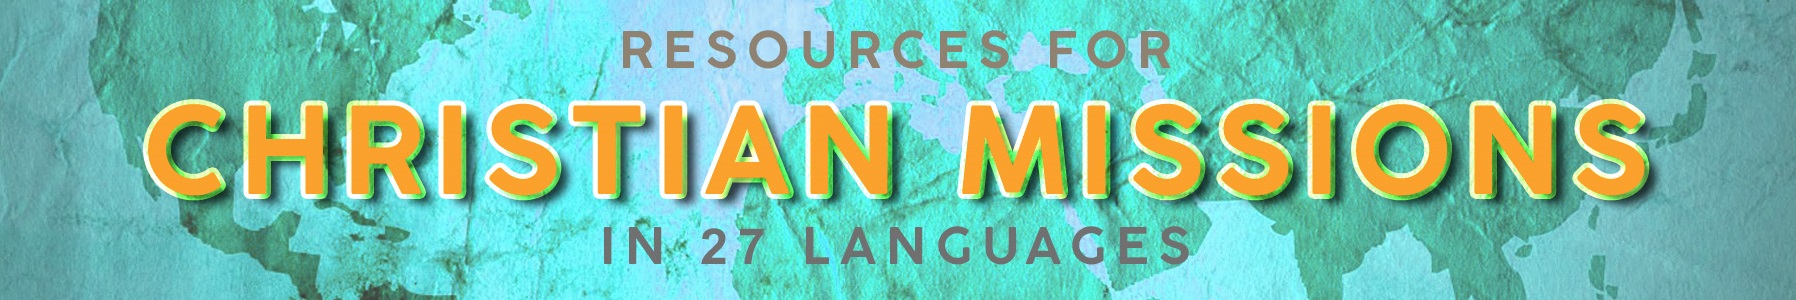 Resources for Missions in 27 Languages